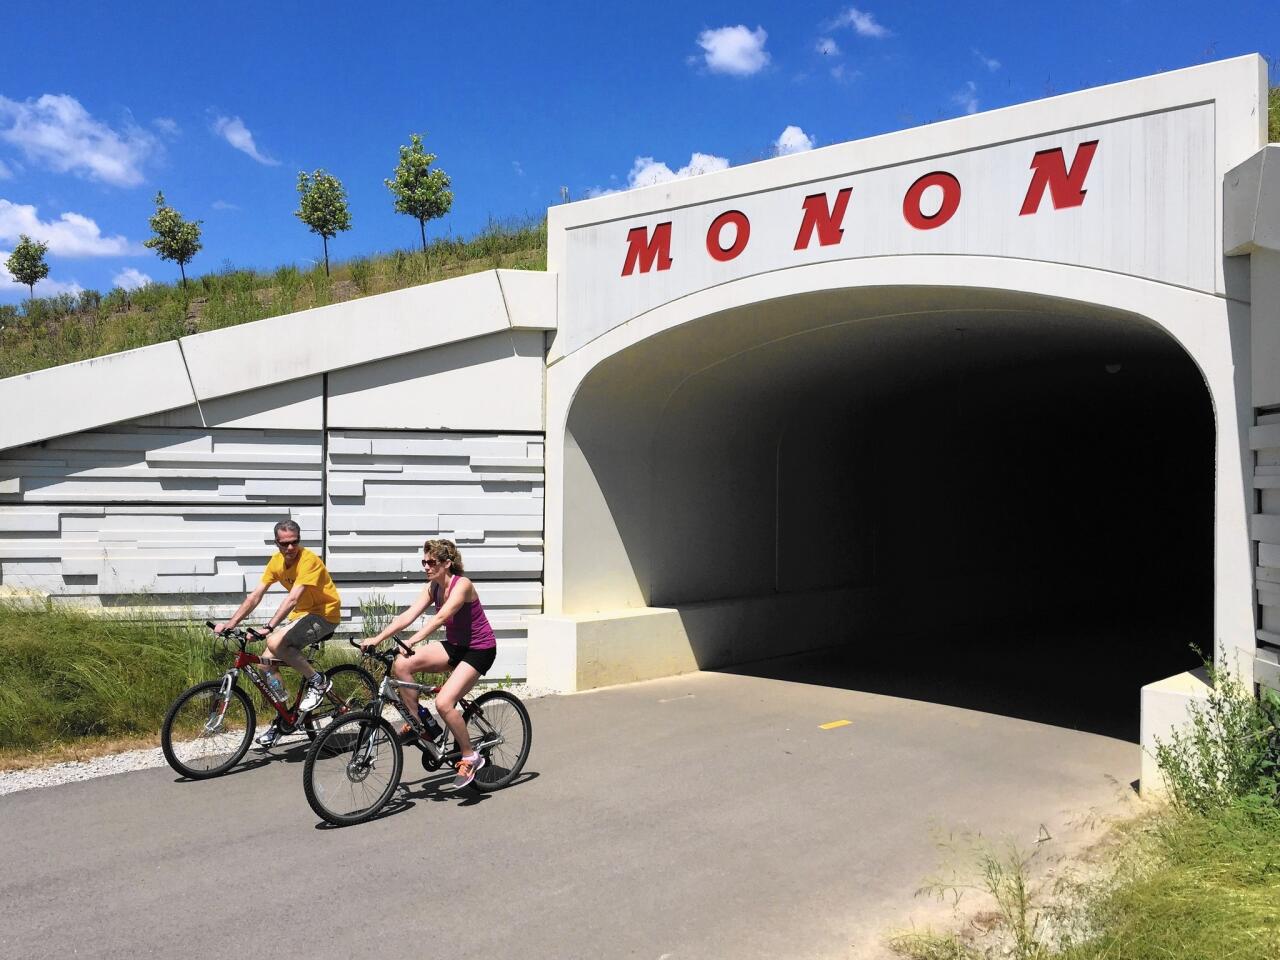 The Monon Trail is a former railway converted to a recreational path that's ideal for cycling.